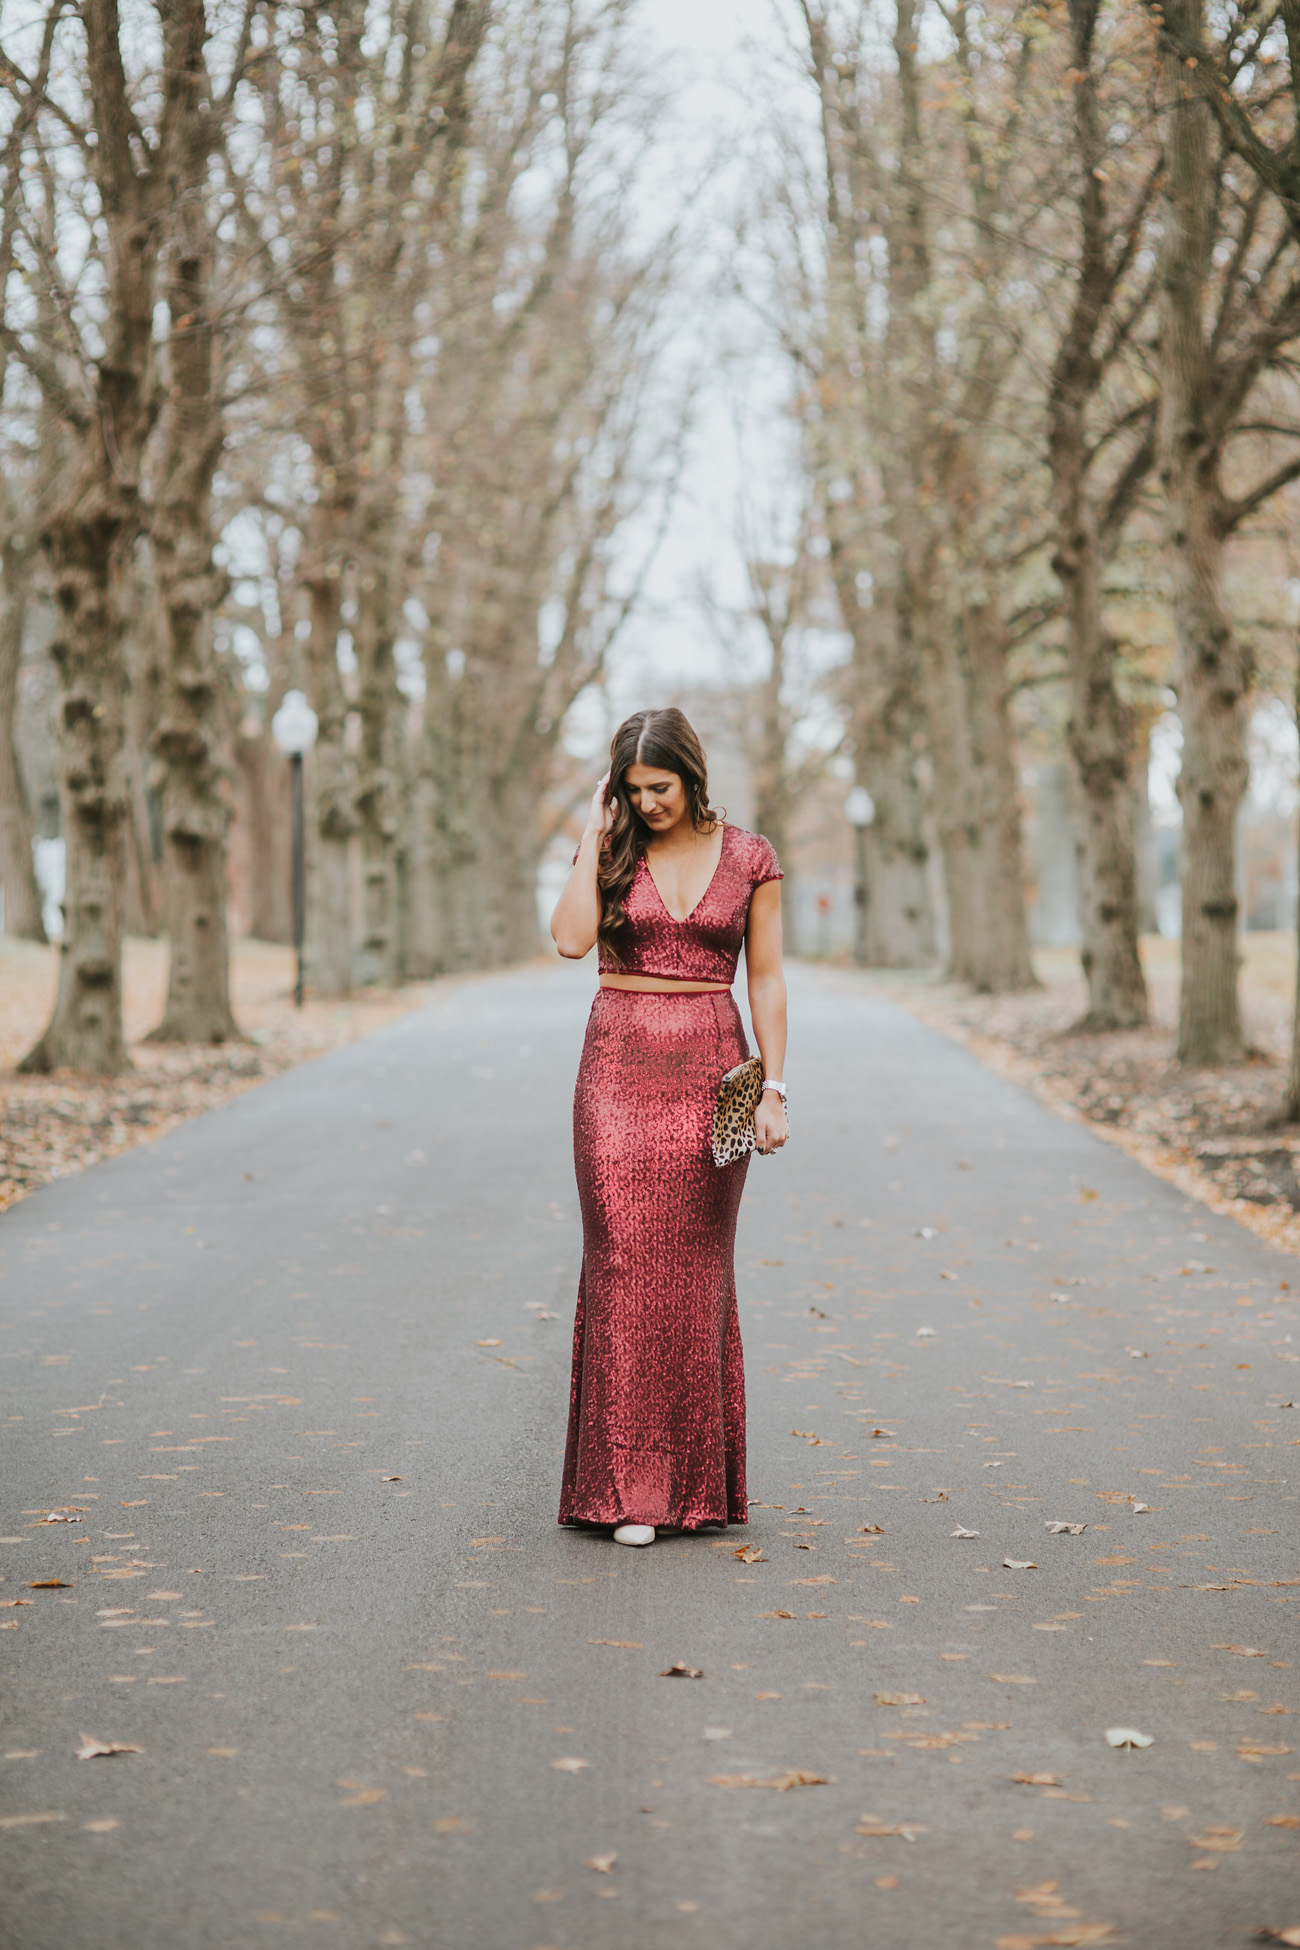 sequin two piece gown, sequin gown, new years eve outfit, new years outfit, new years dress, sequin maxi dress, sequin crop top, leopard clutch, calf hair clutch, nye dress, fancy nye outfit // grace wainwright a southern drawl